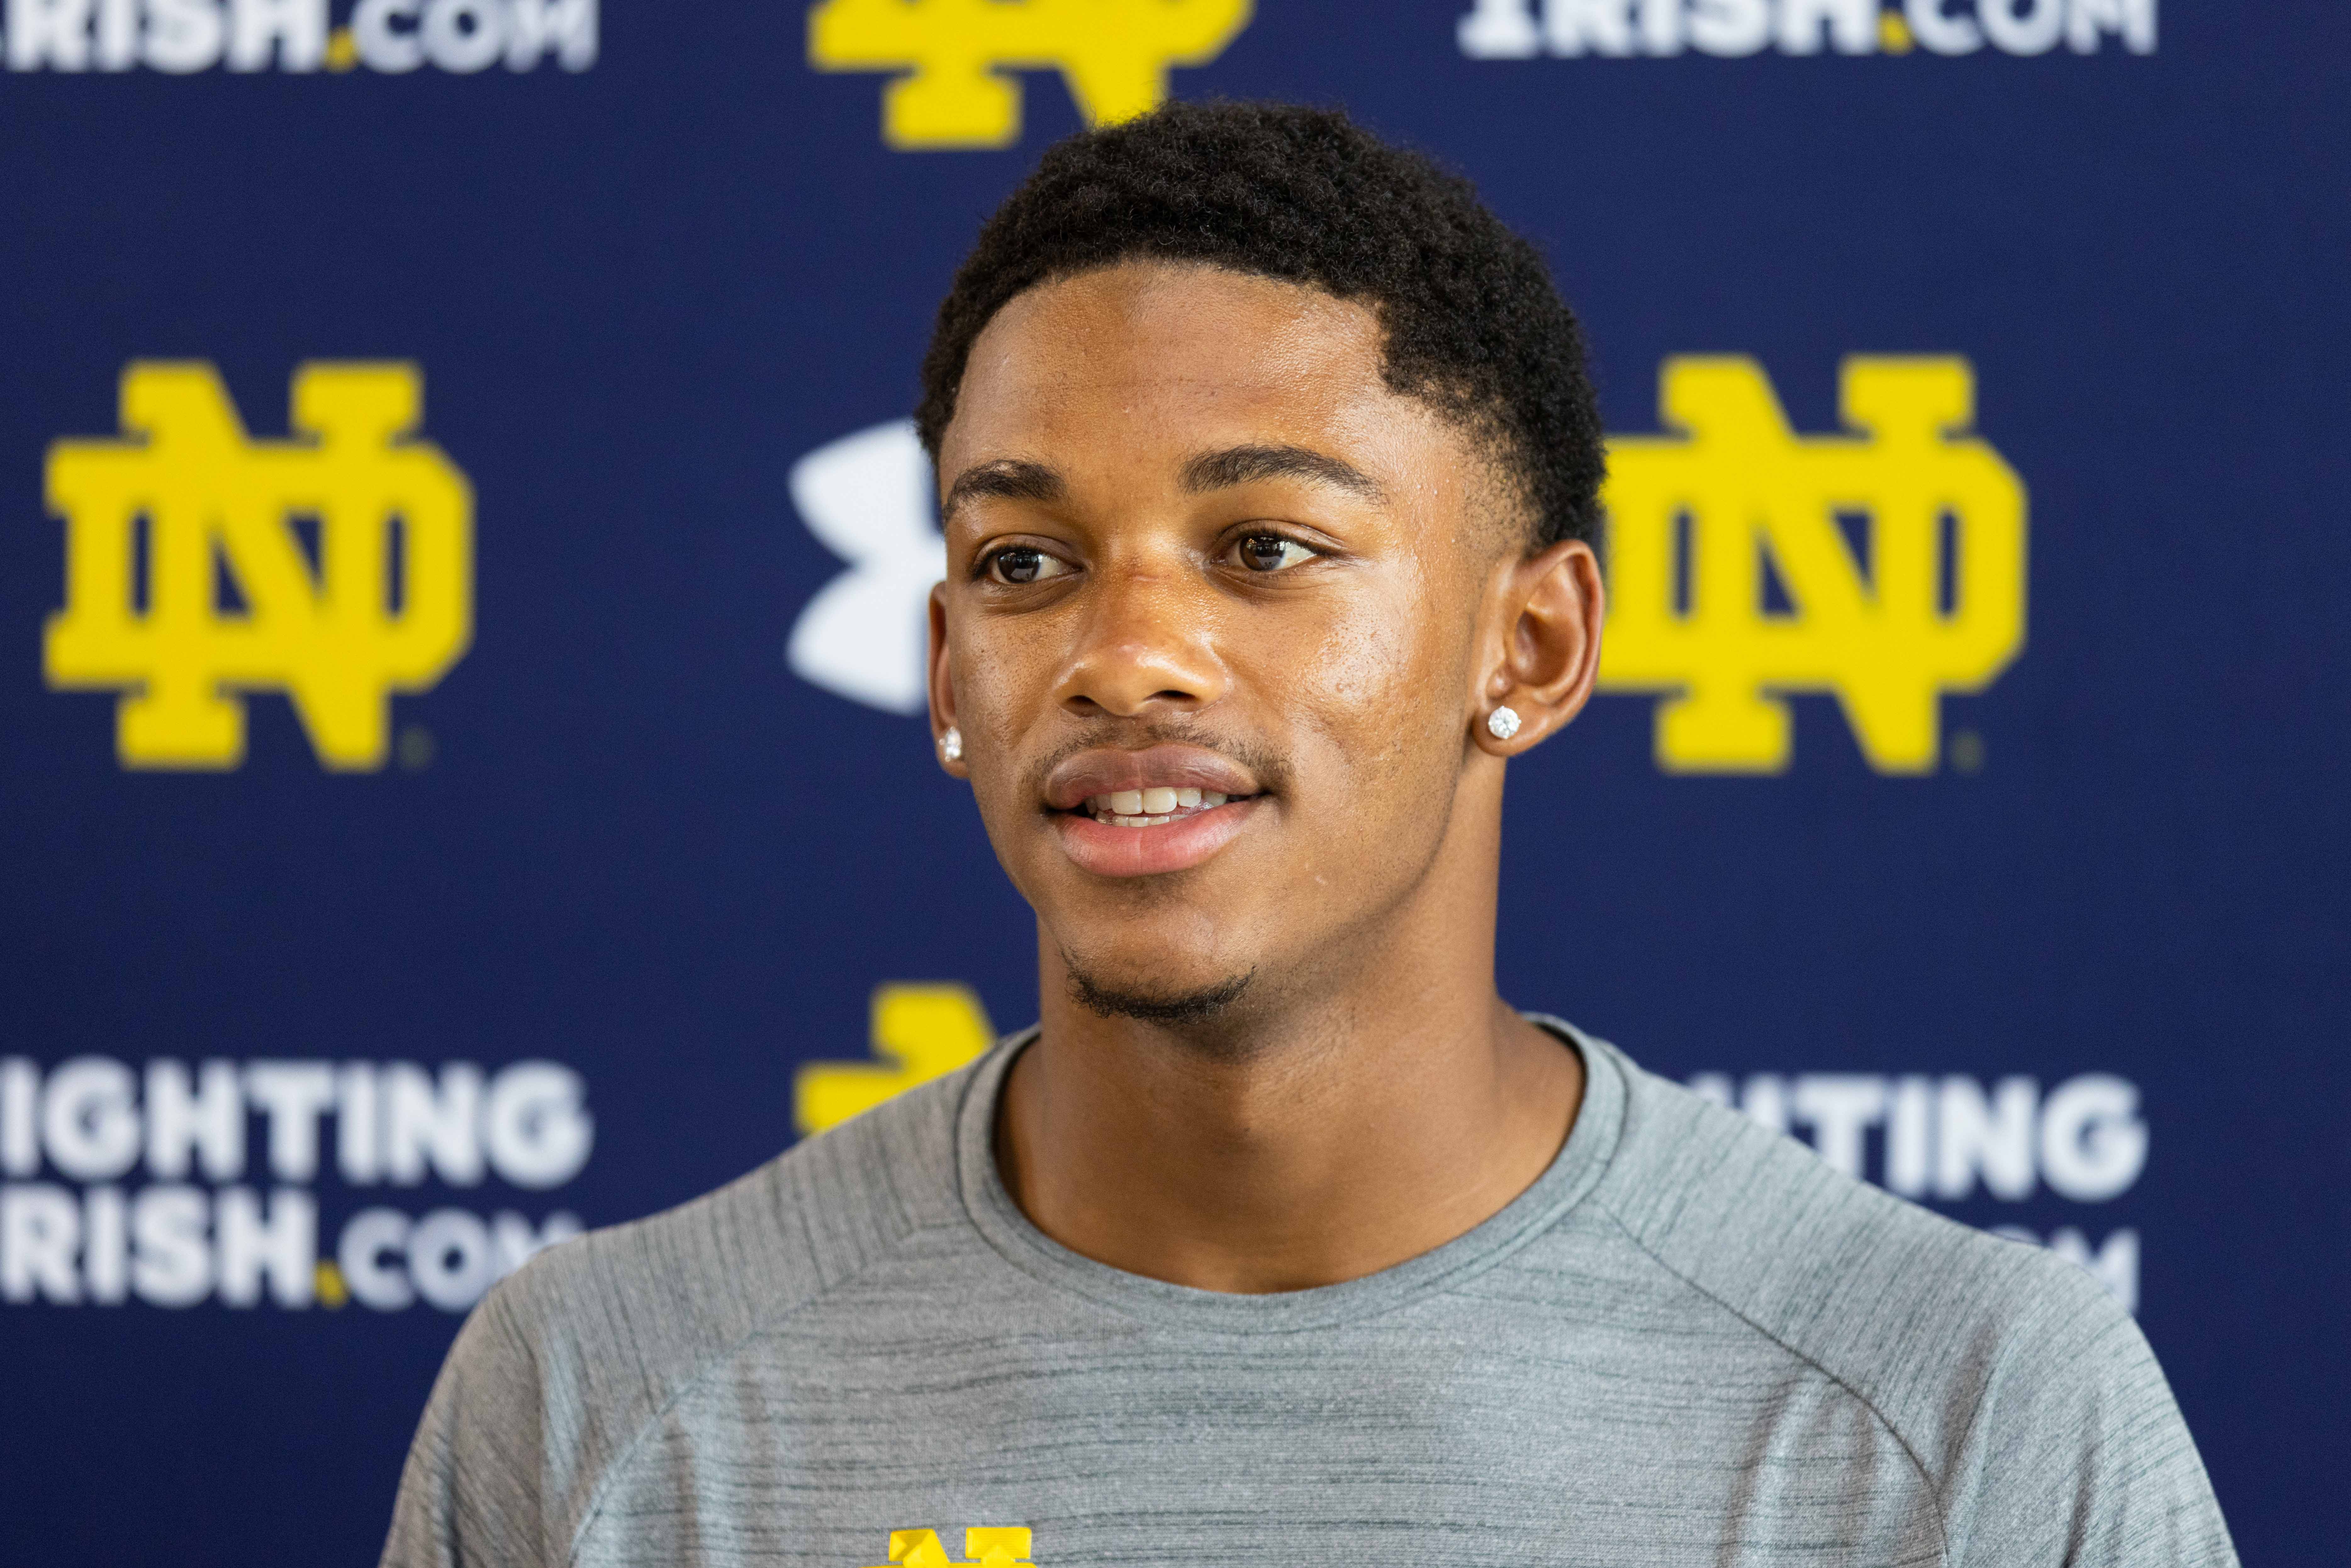 Freshmen welcomed into Notre Dame defensive backs room. 'It makes me want to work harder.'